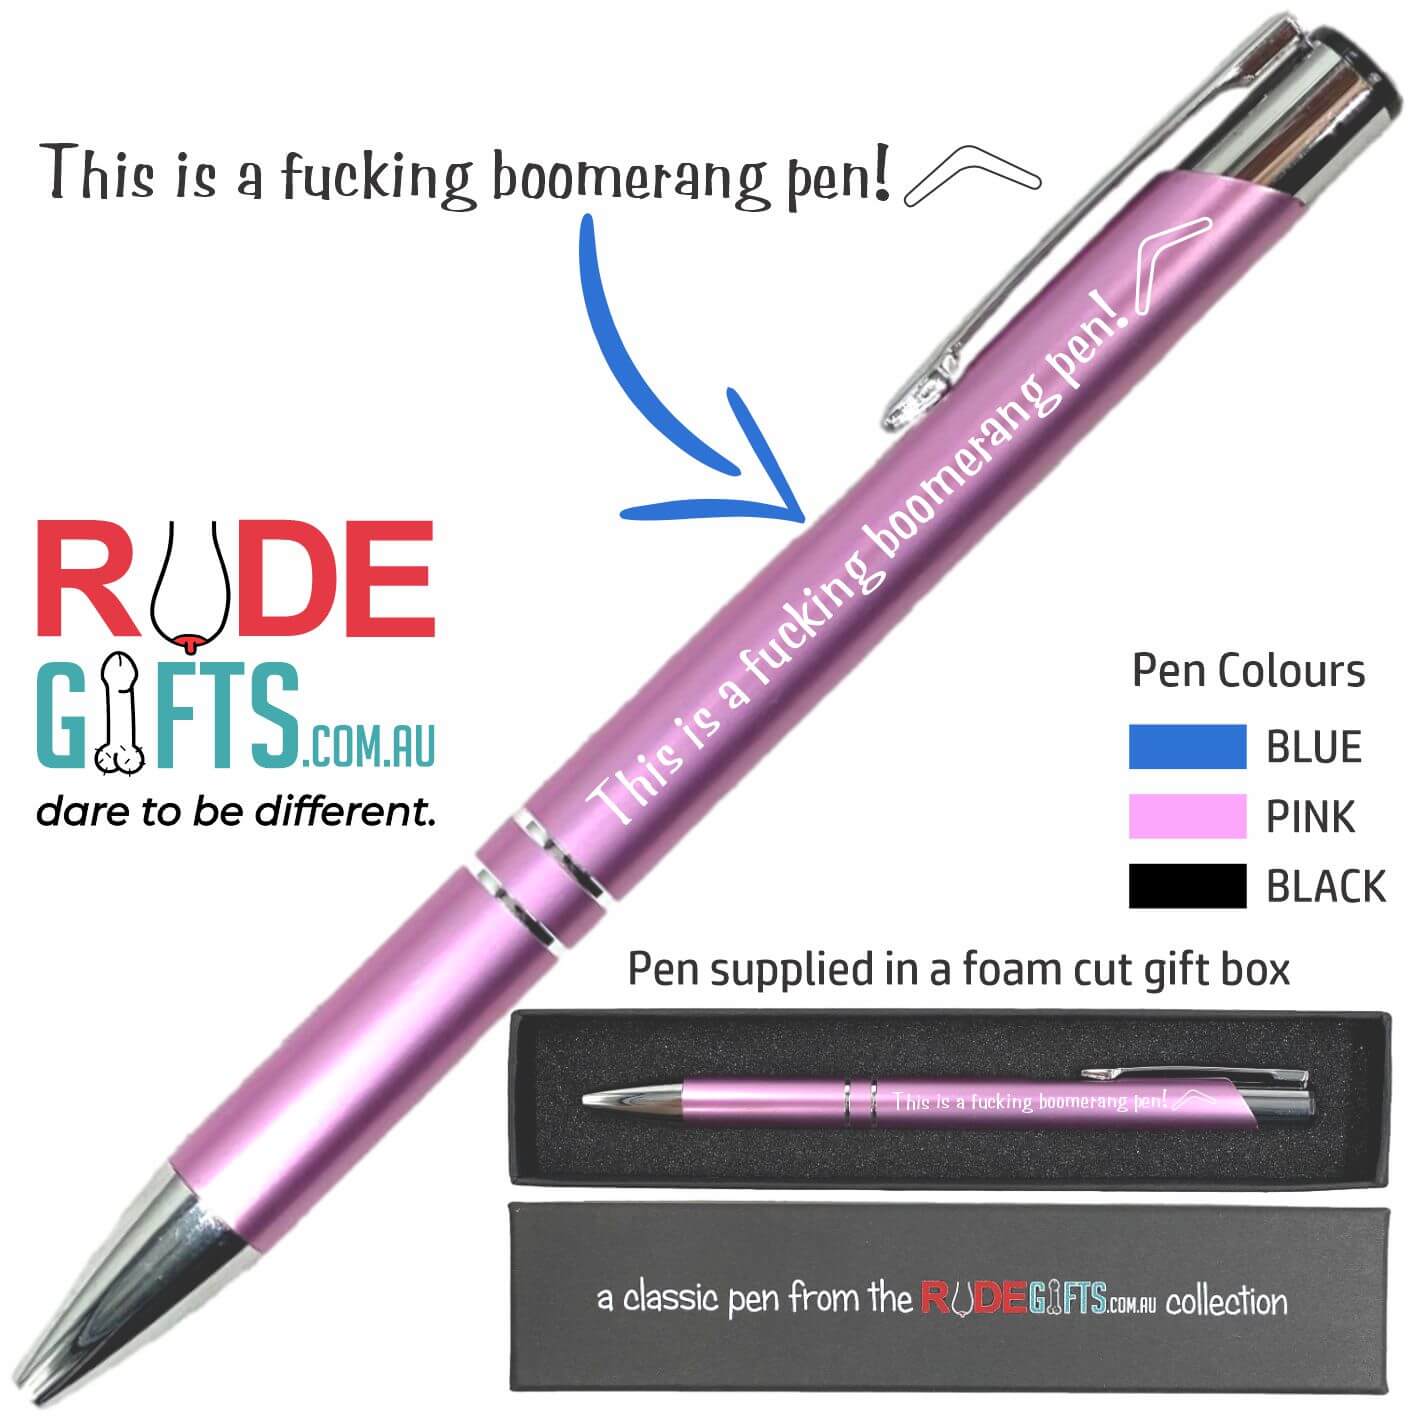 This is a fucking boomerang pen!